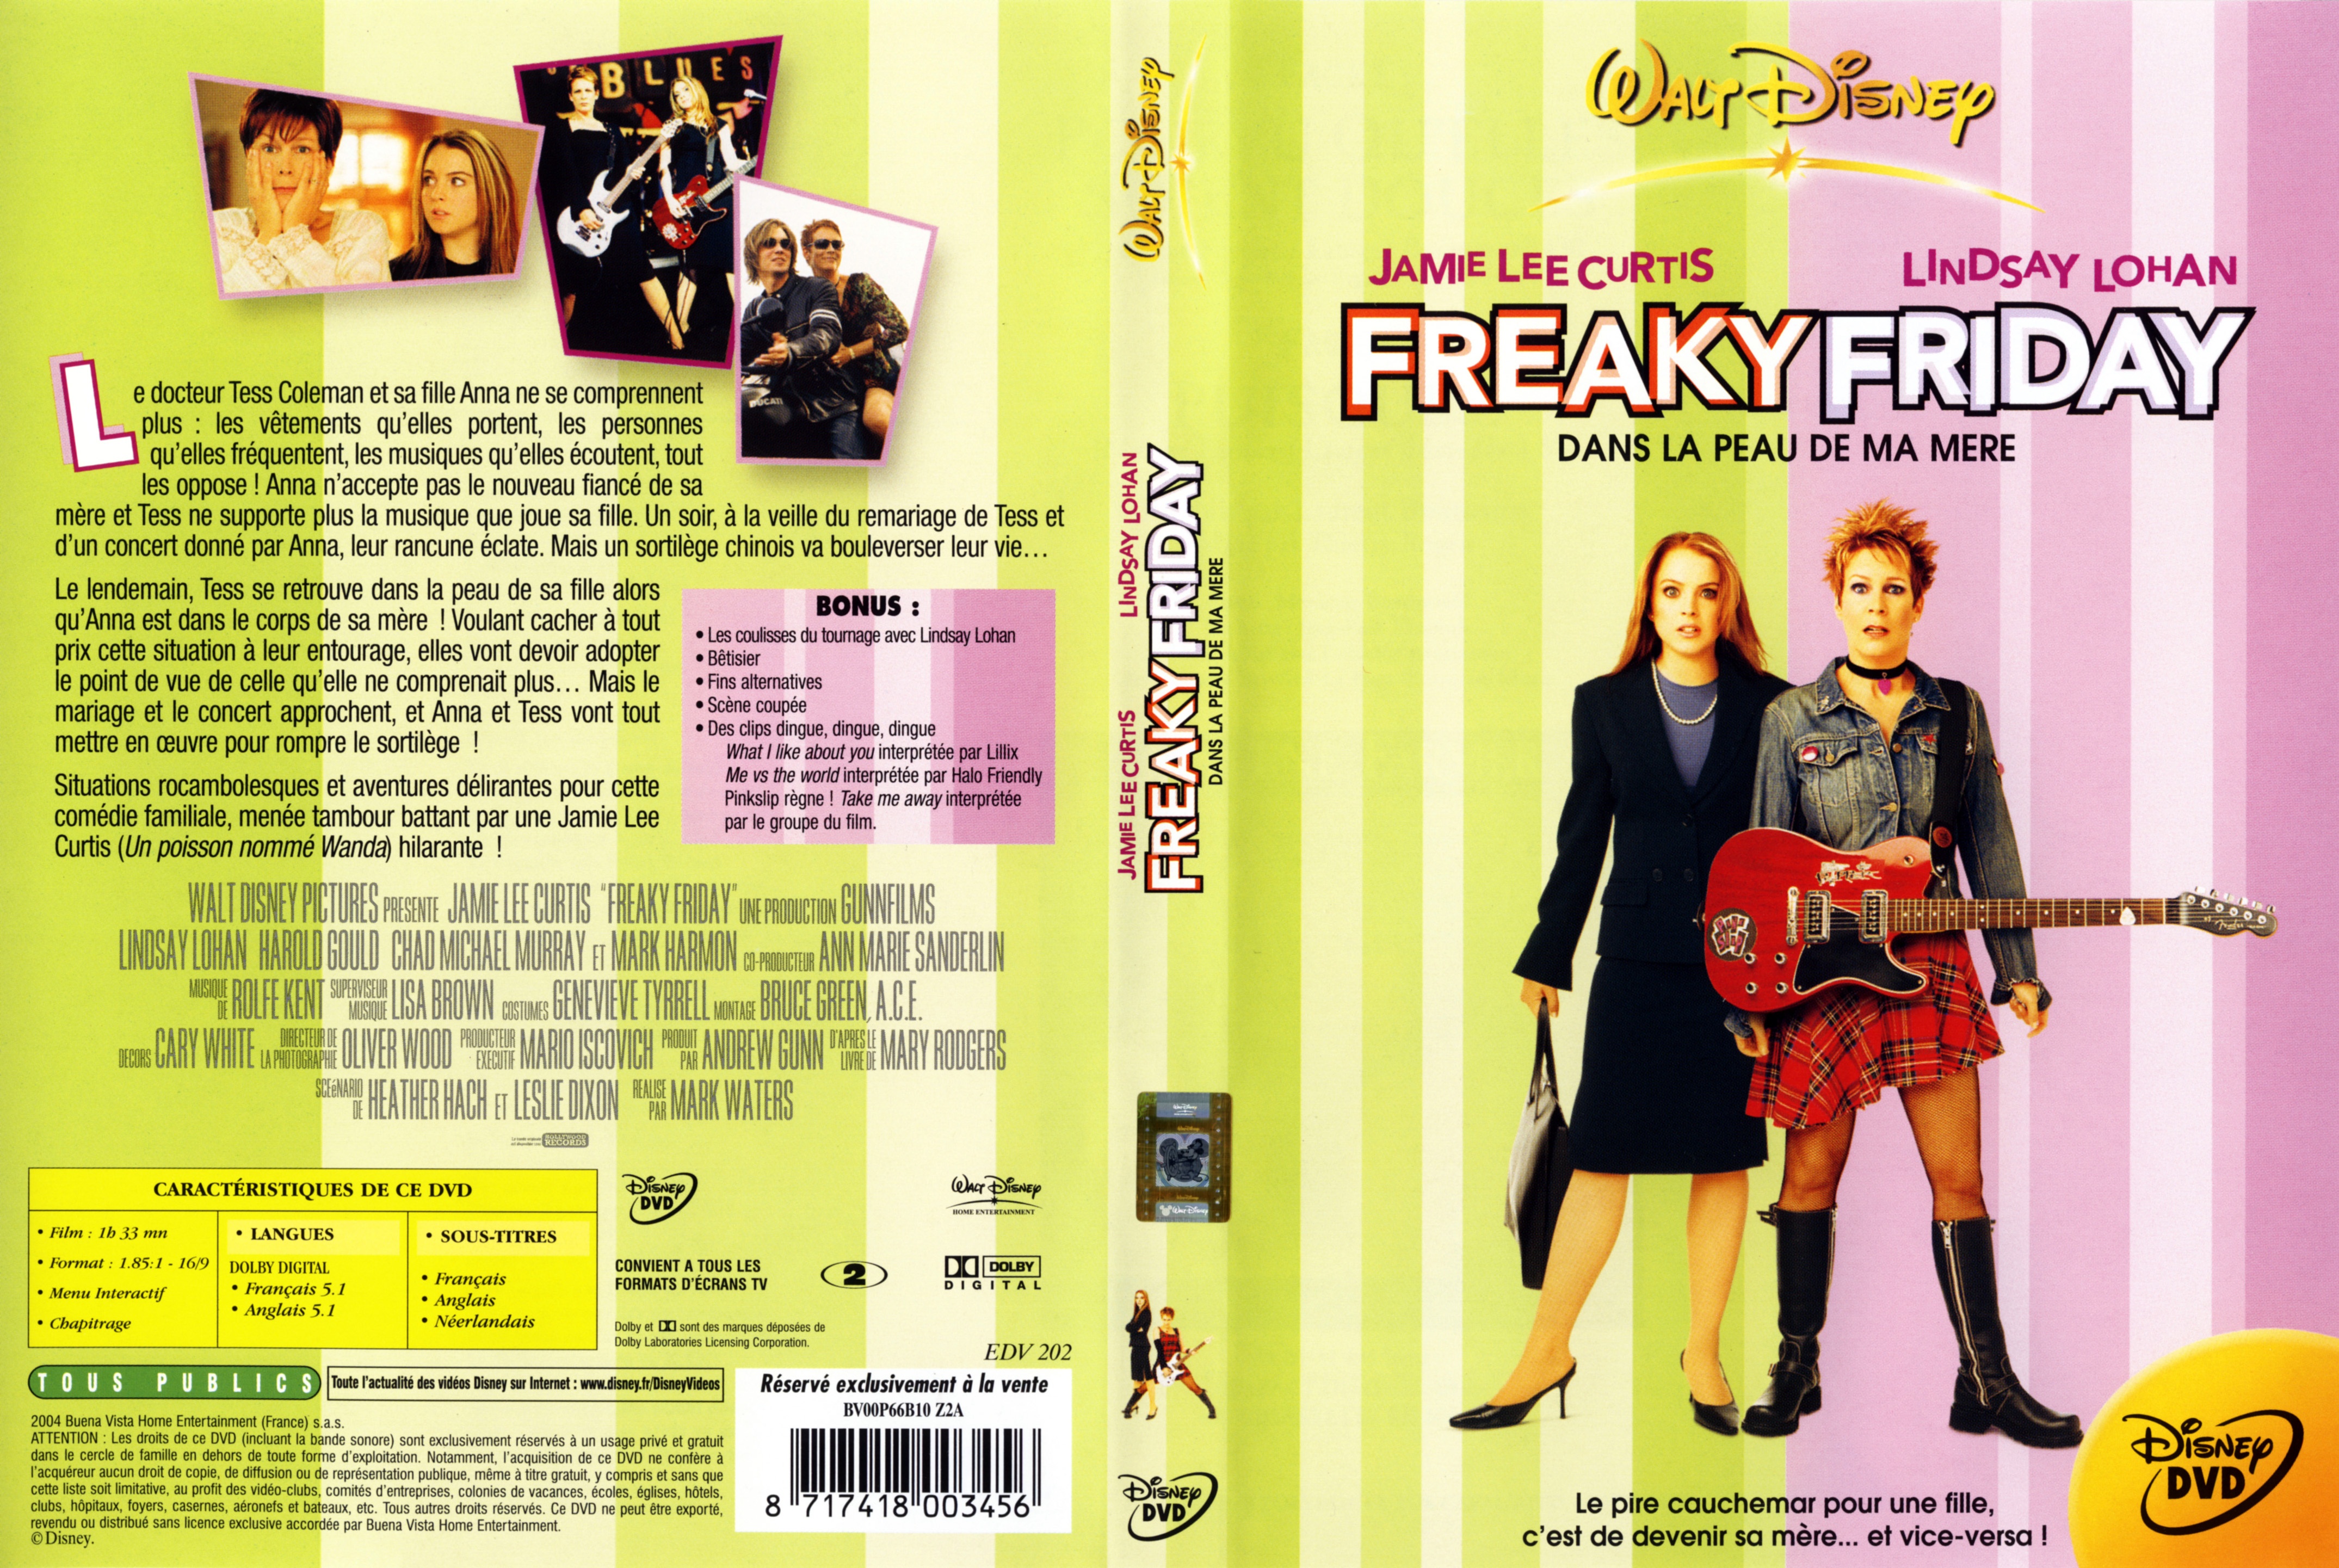 Jaquette DVD Freaky friday